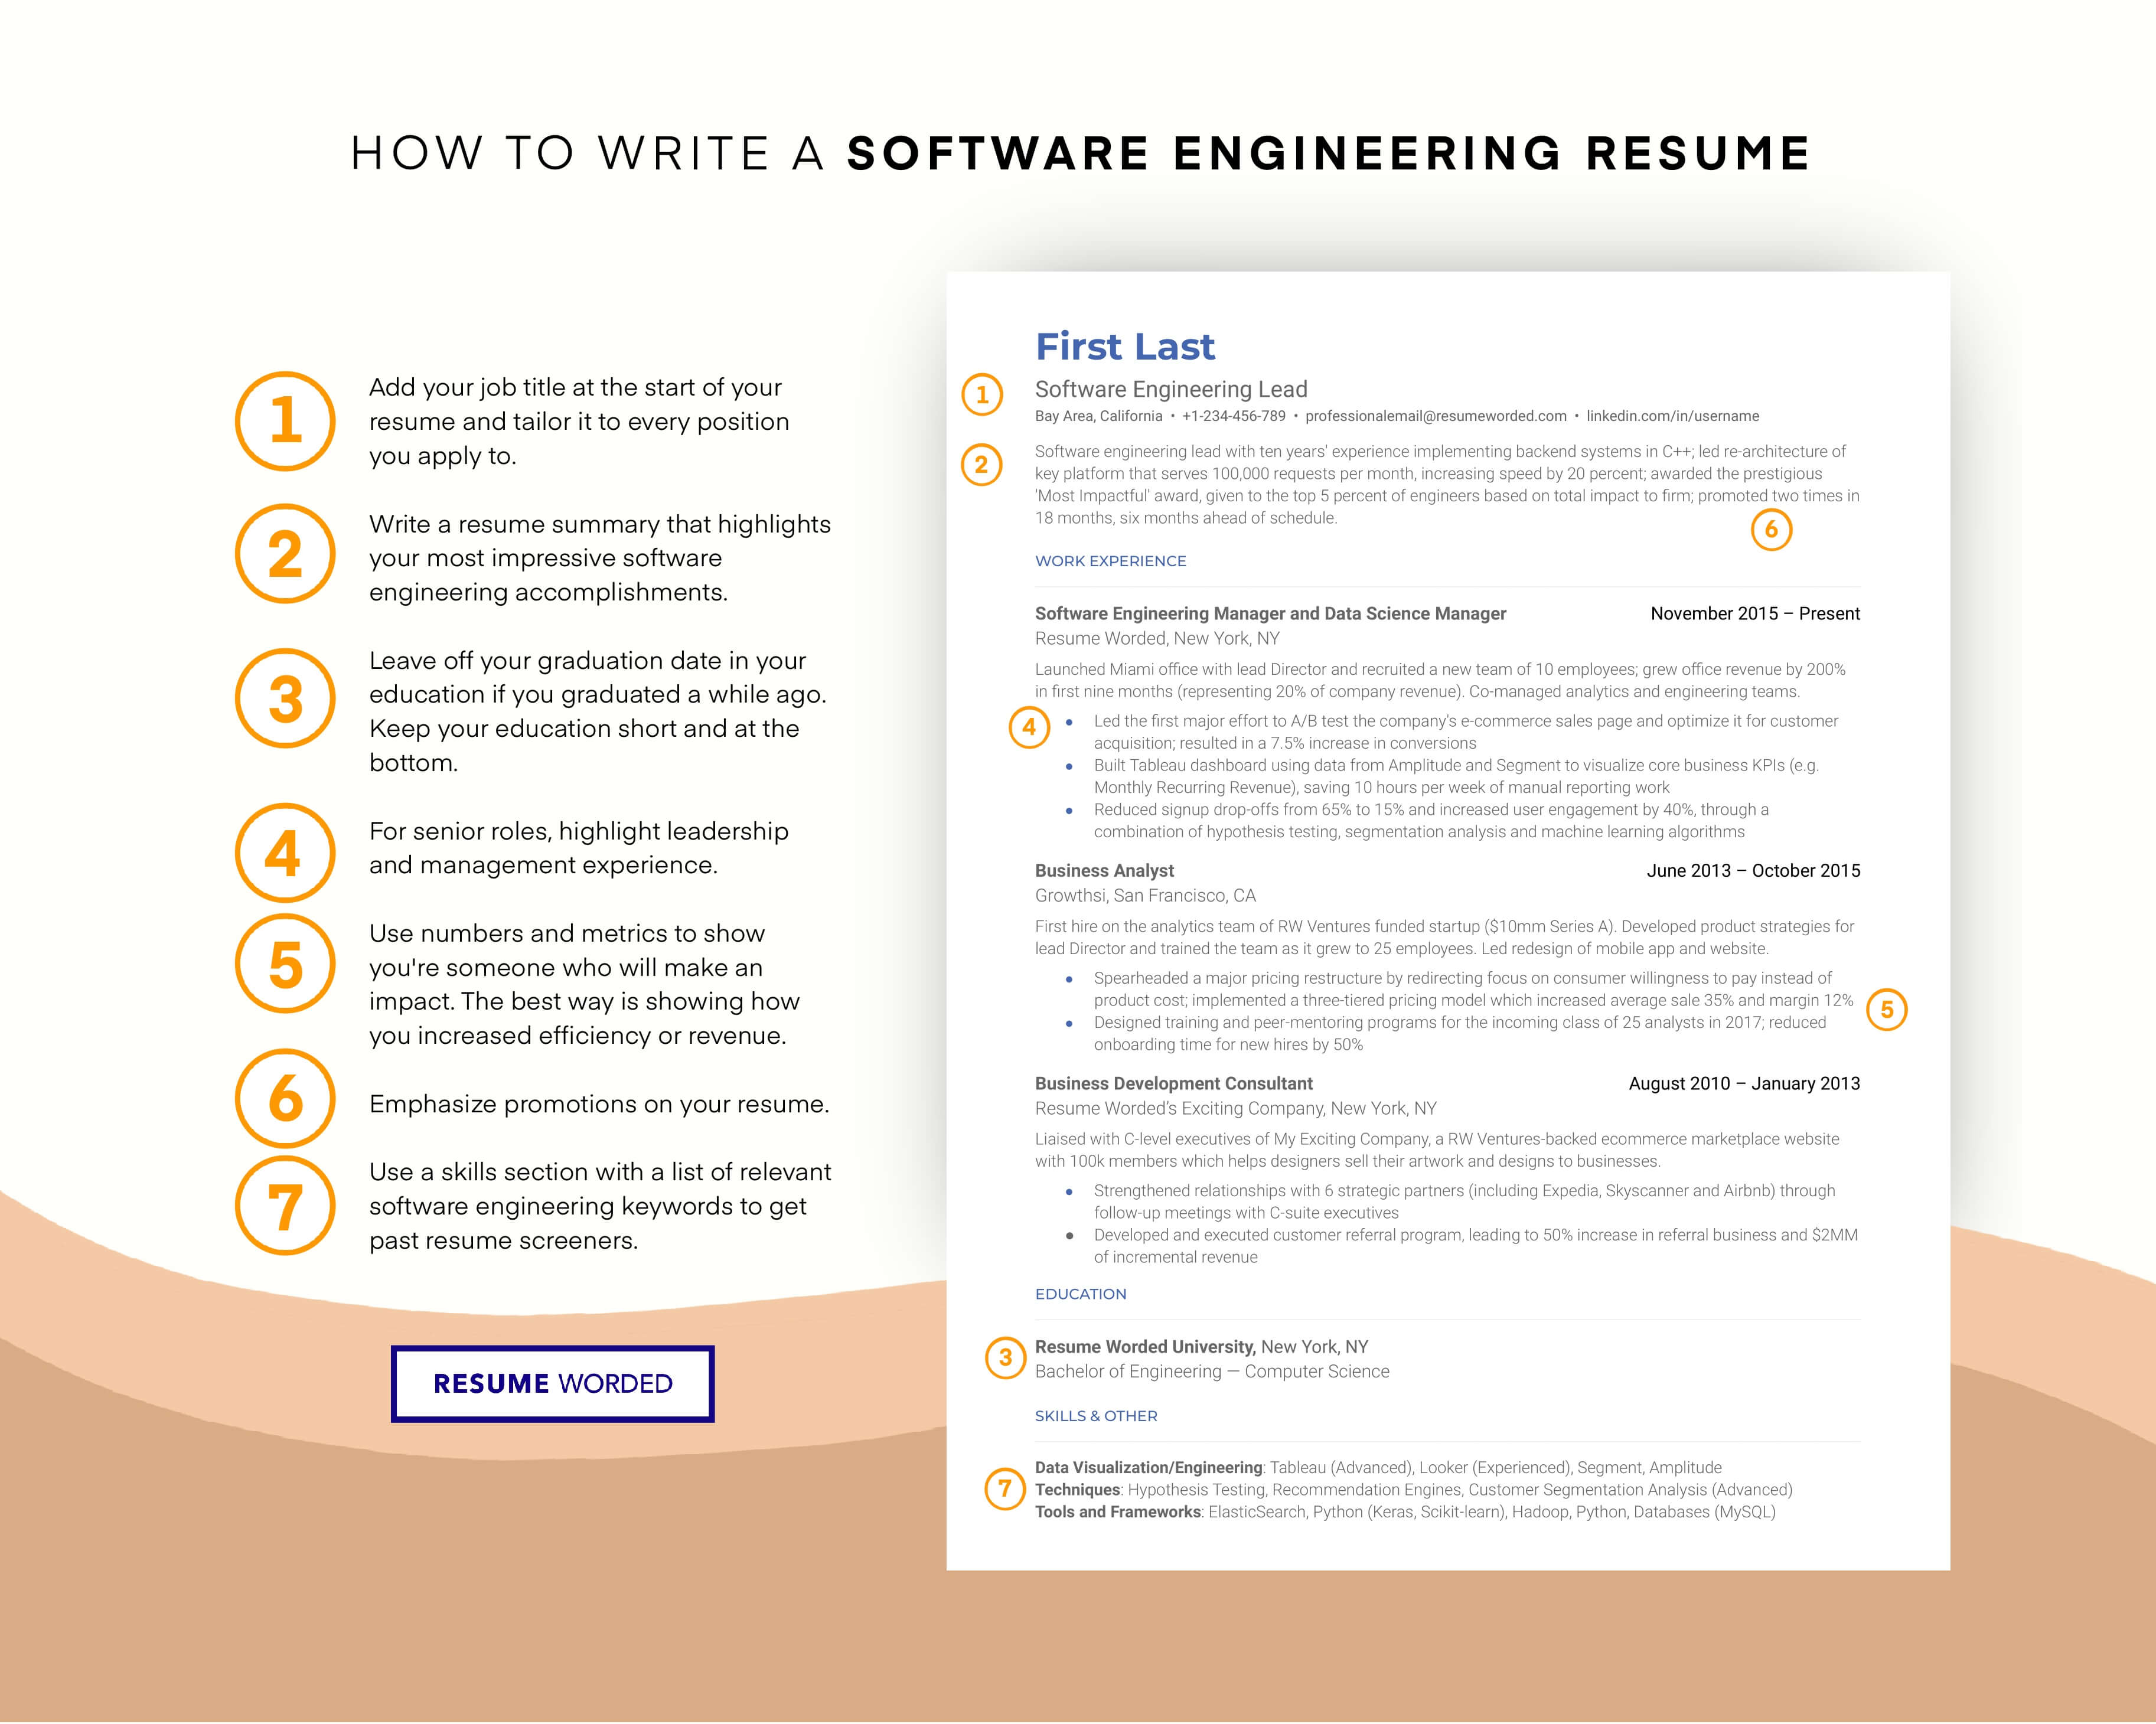 Showcase your software engineering skills. - Embedded System Engineer Resume